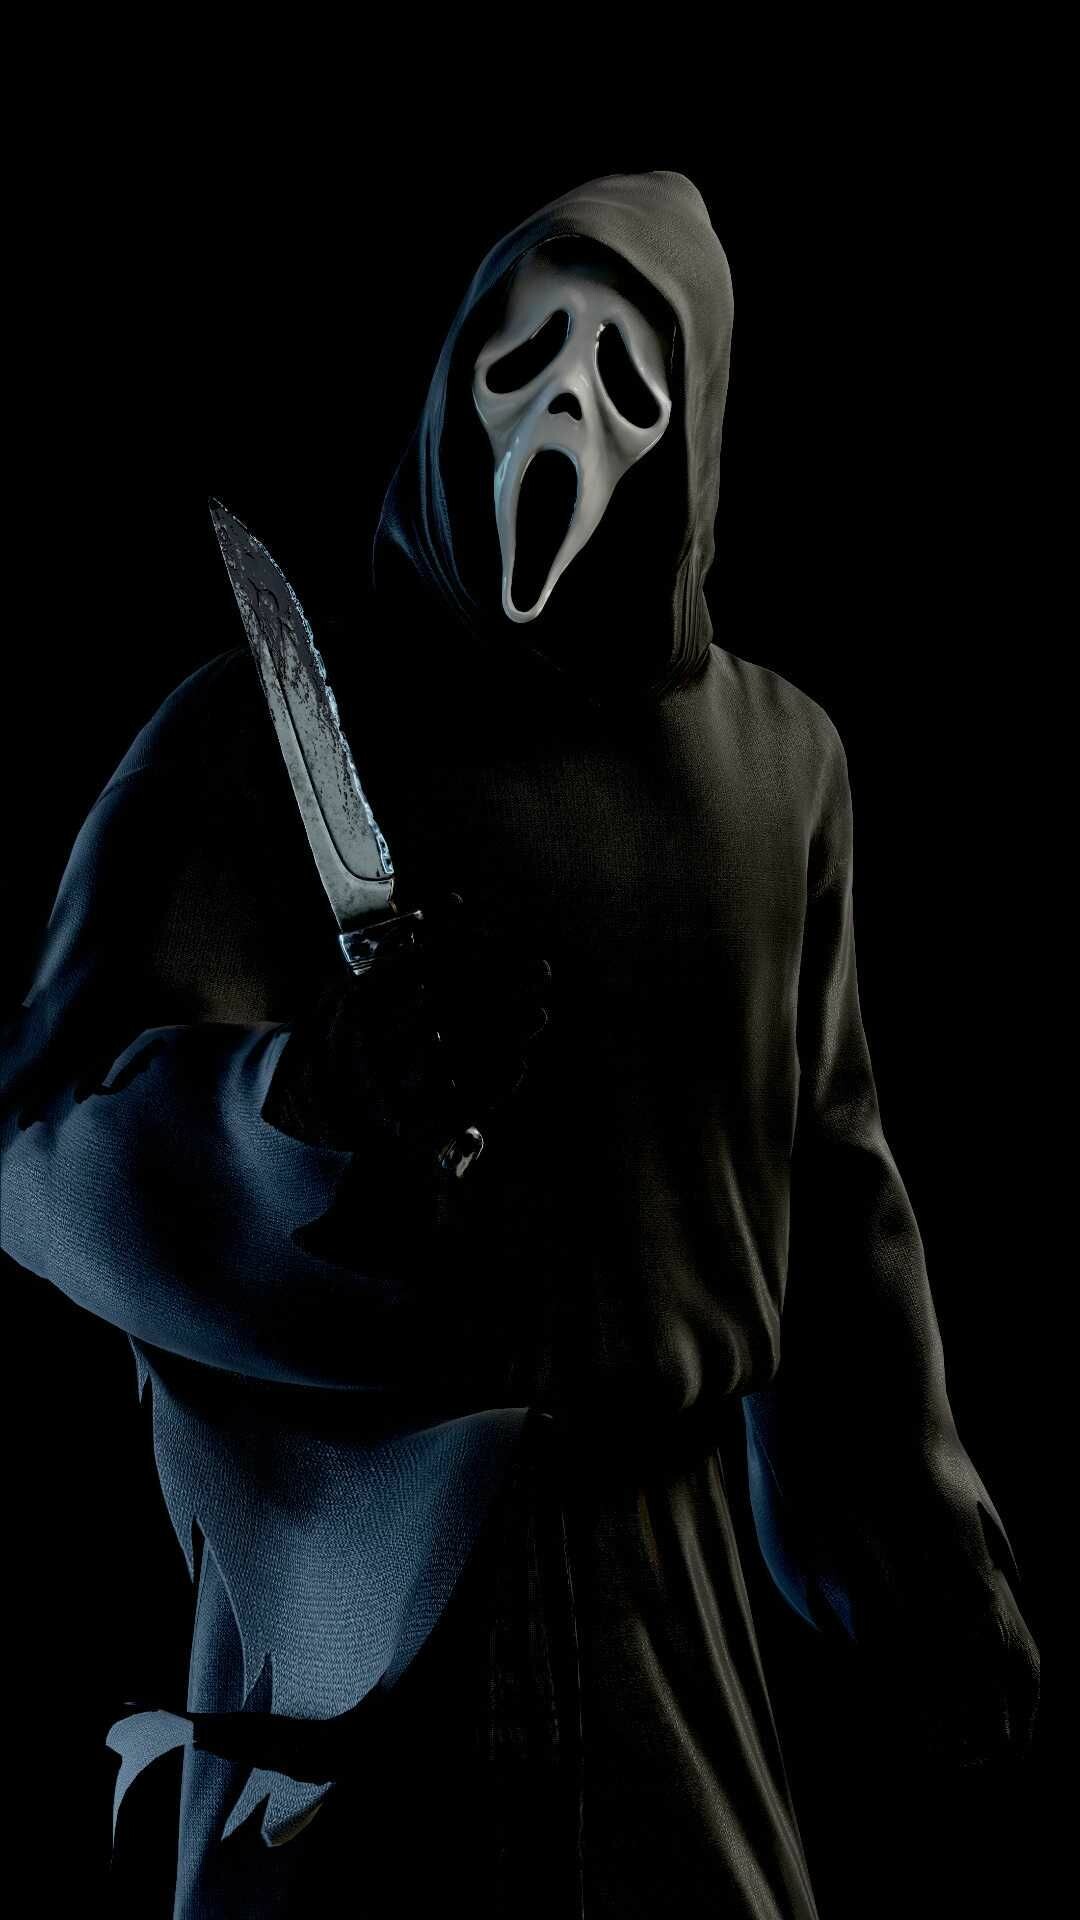 Scream (2022): The film's working title during production was Parkside Killers. 1080x1920 Full HD Wallpaper.